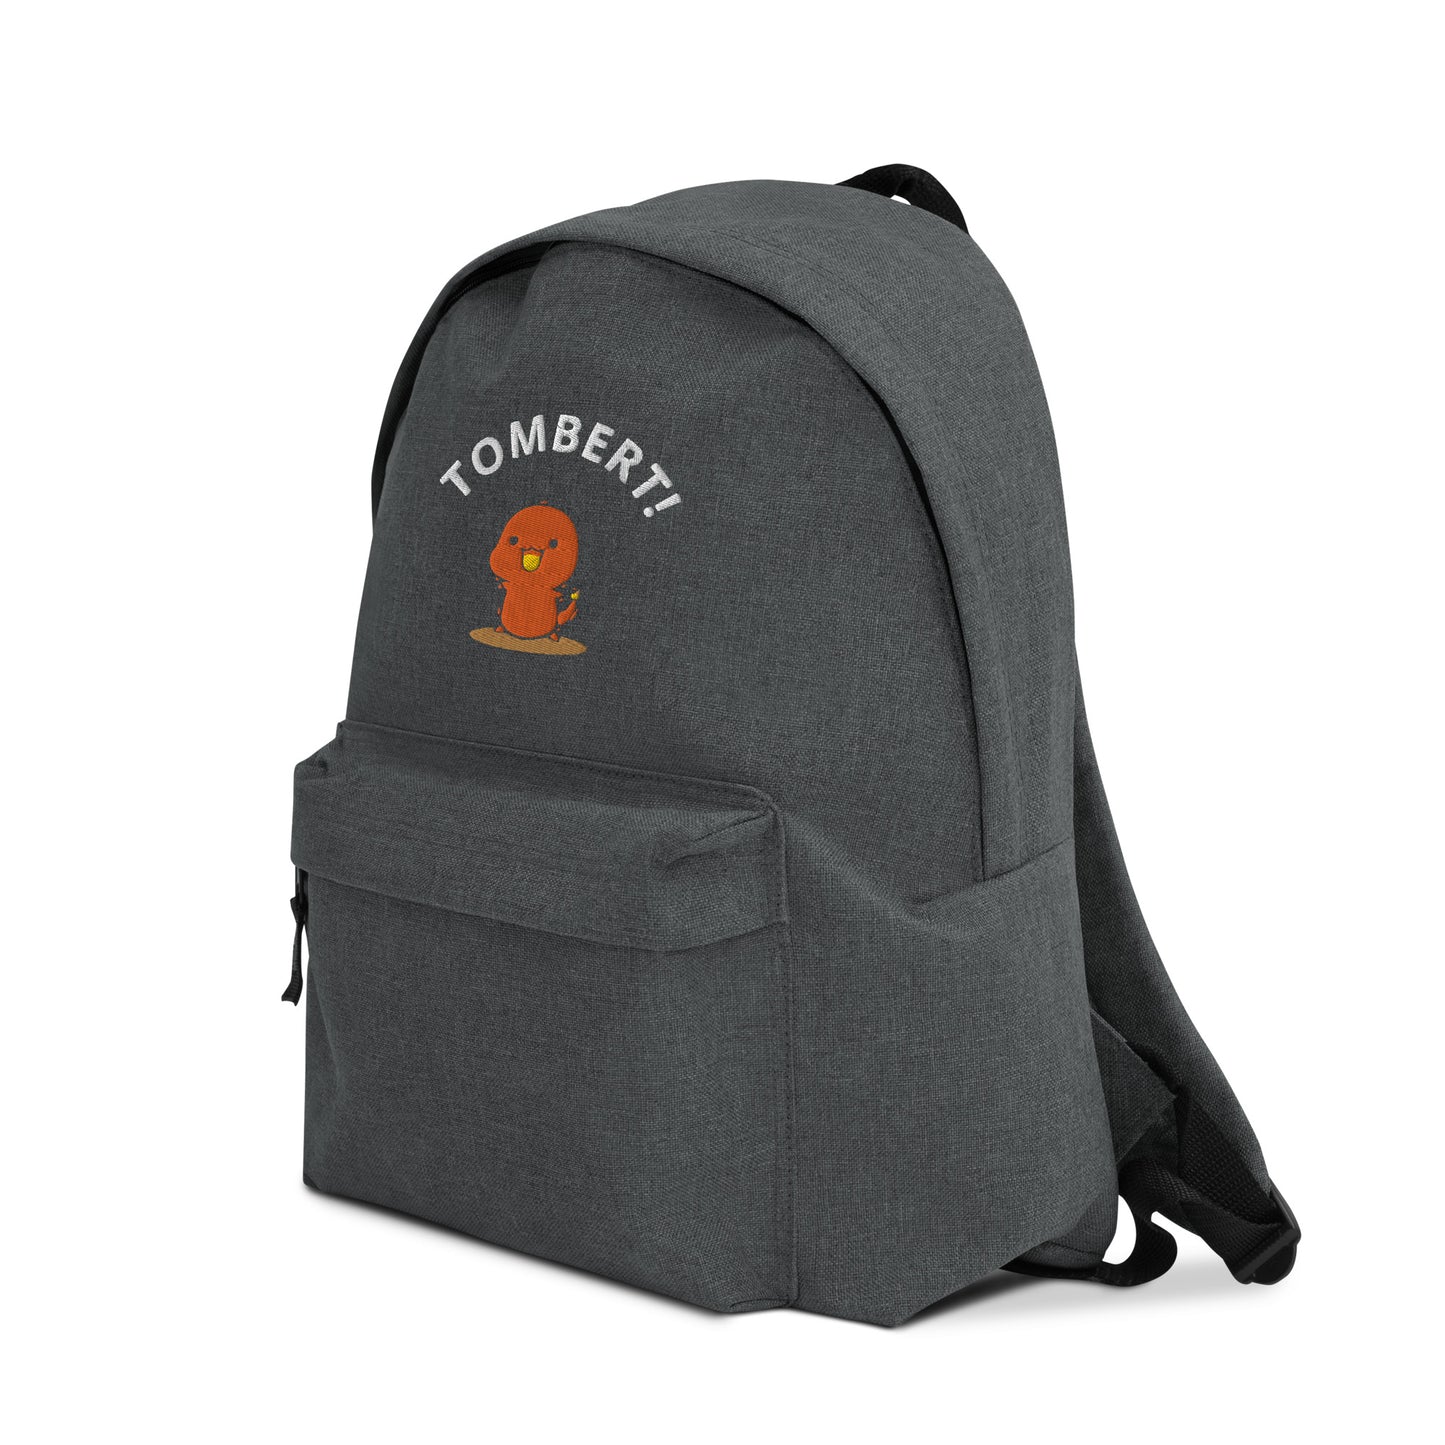 Tombert The Embroidered Backpack!